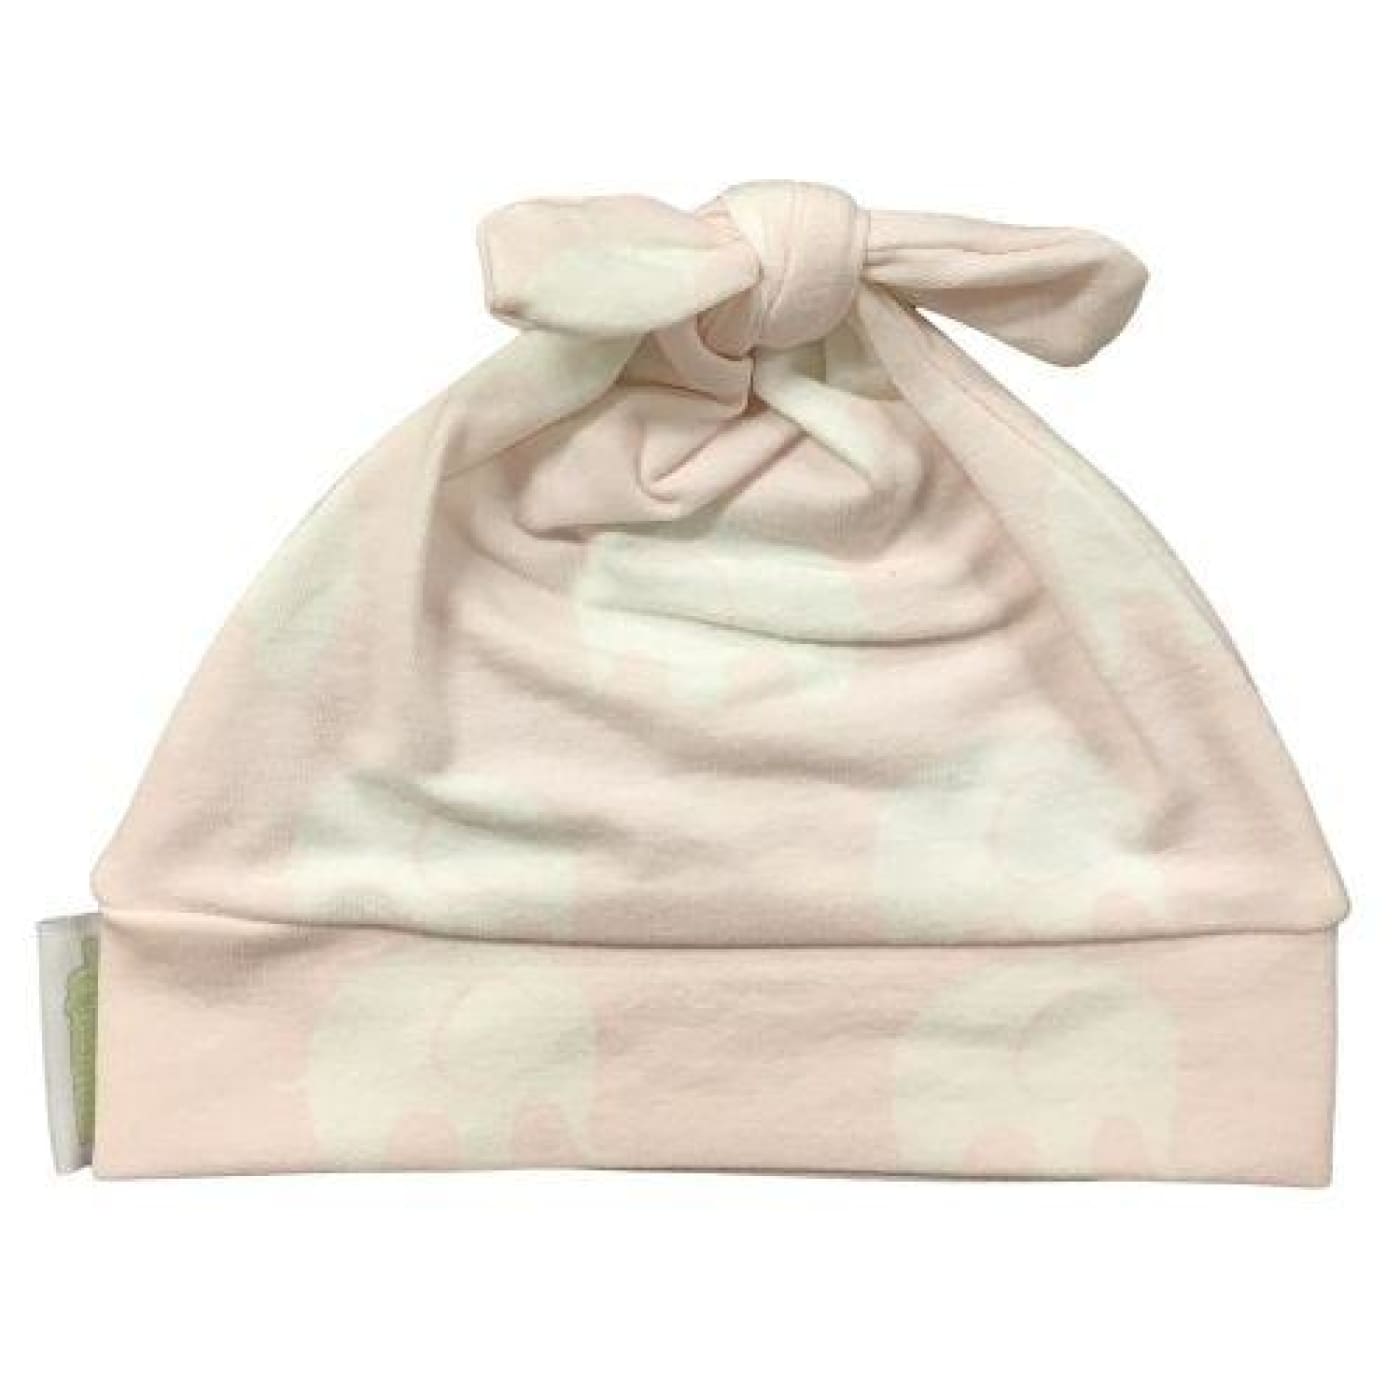 Woombie Cotton Beanie - Pink Elephant 0-6M - 0-6m / Pink Elephant - BABY & TODDLER CLOTHING - BEANIES/HATS